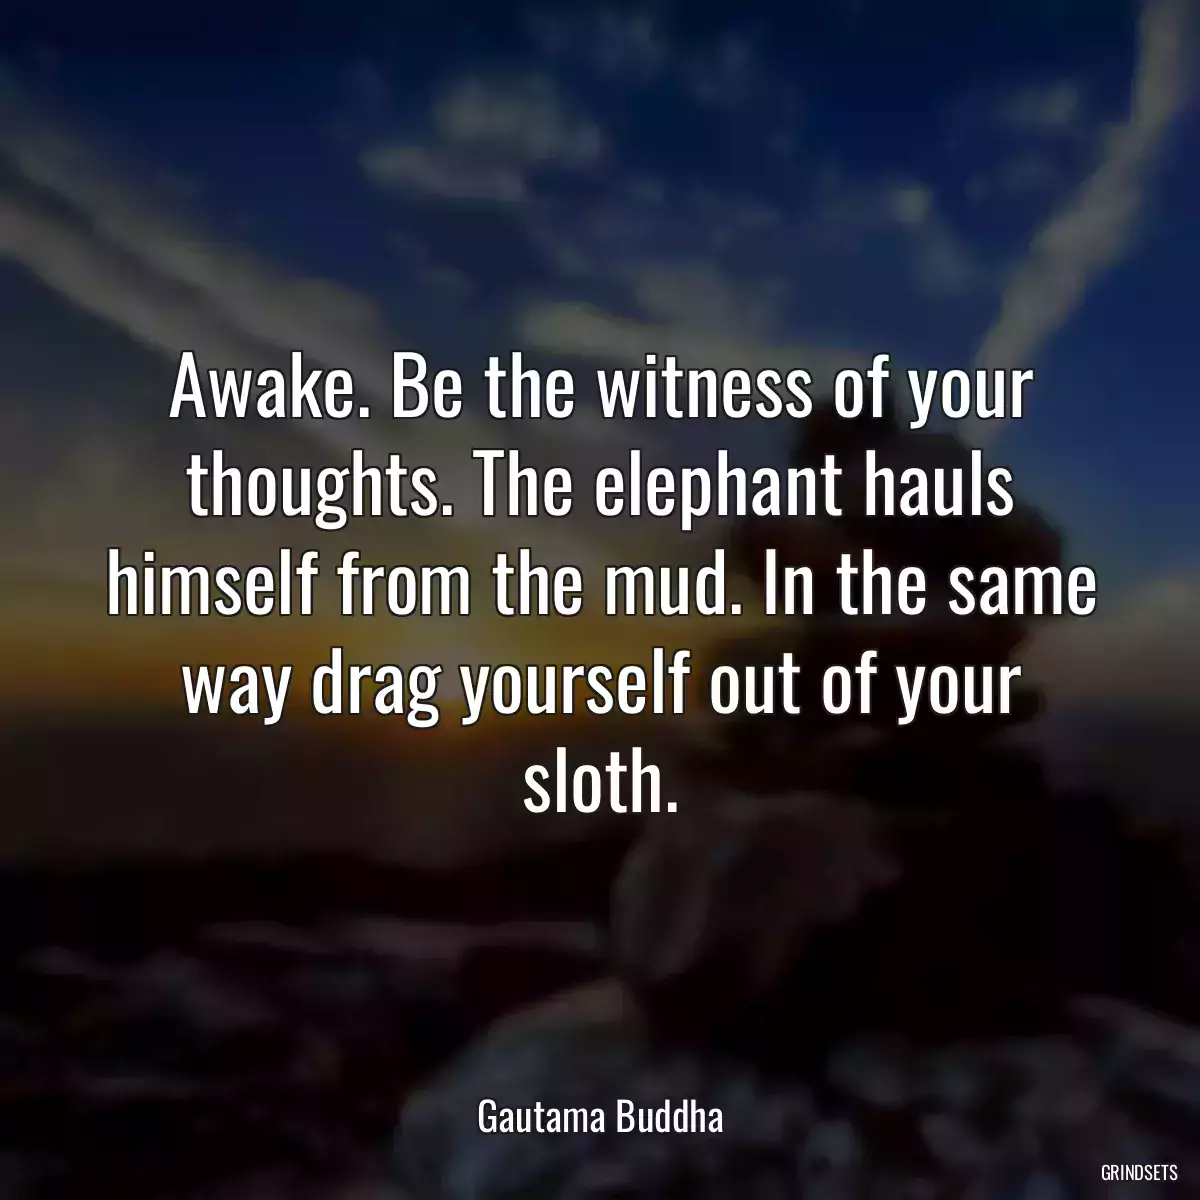 Awake. Be the witness of your thoughts. The elephant hauls himself from the mud. In the same way drag yourself out of your sloth.